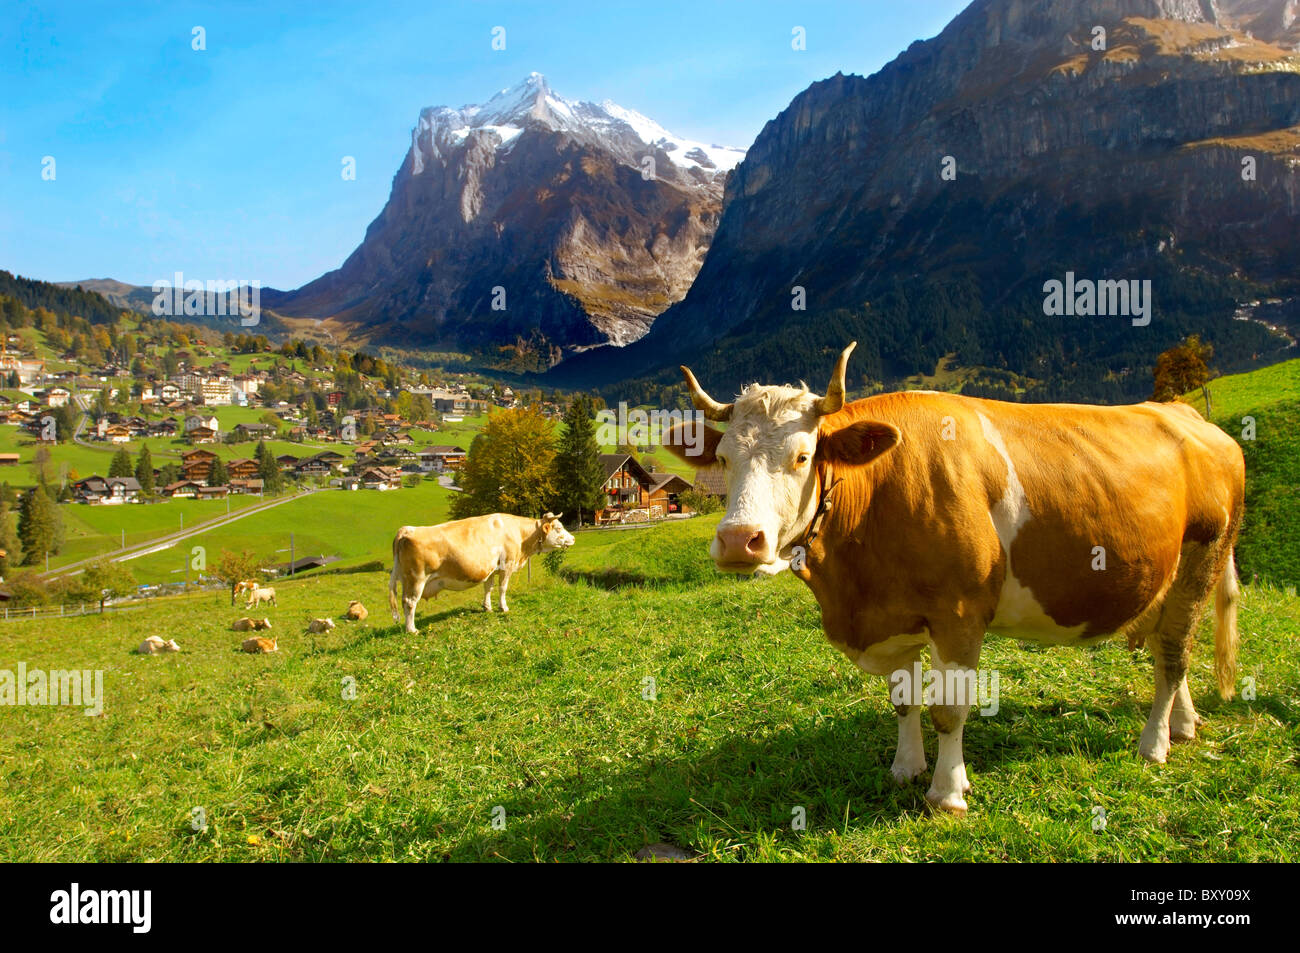 Alpine cow in a high alps meadow with a view of mountain peaks behind near Grindelwald Stock Photo